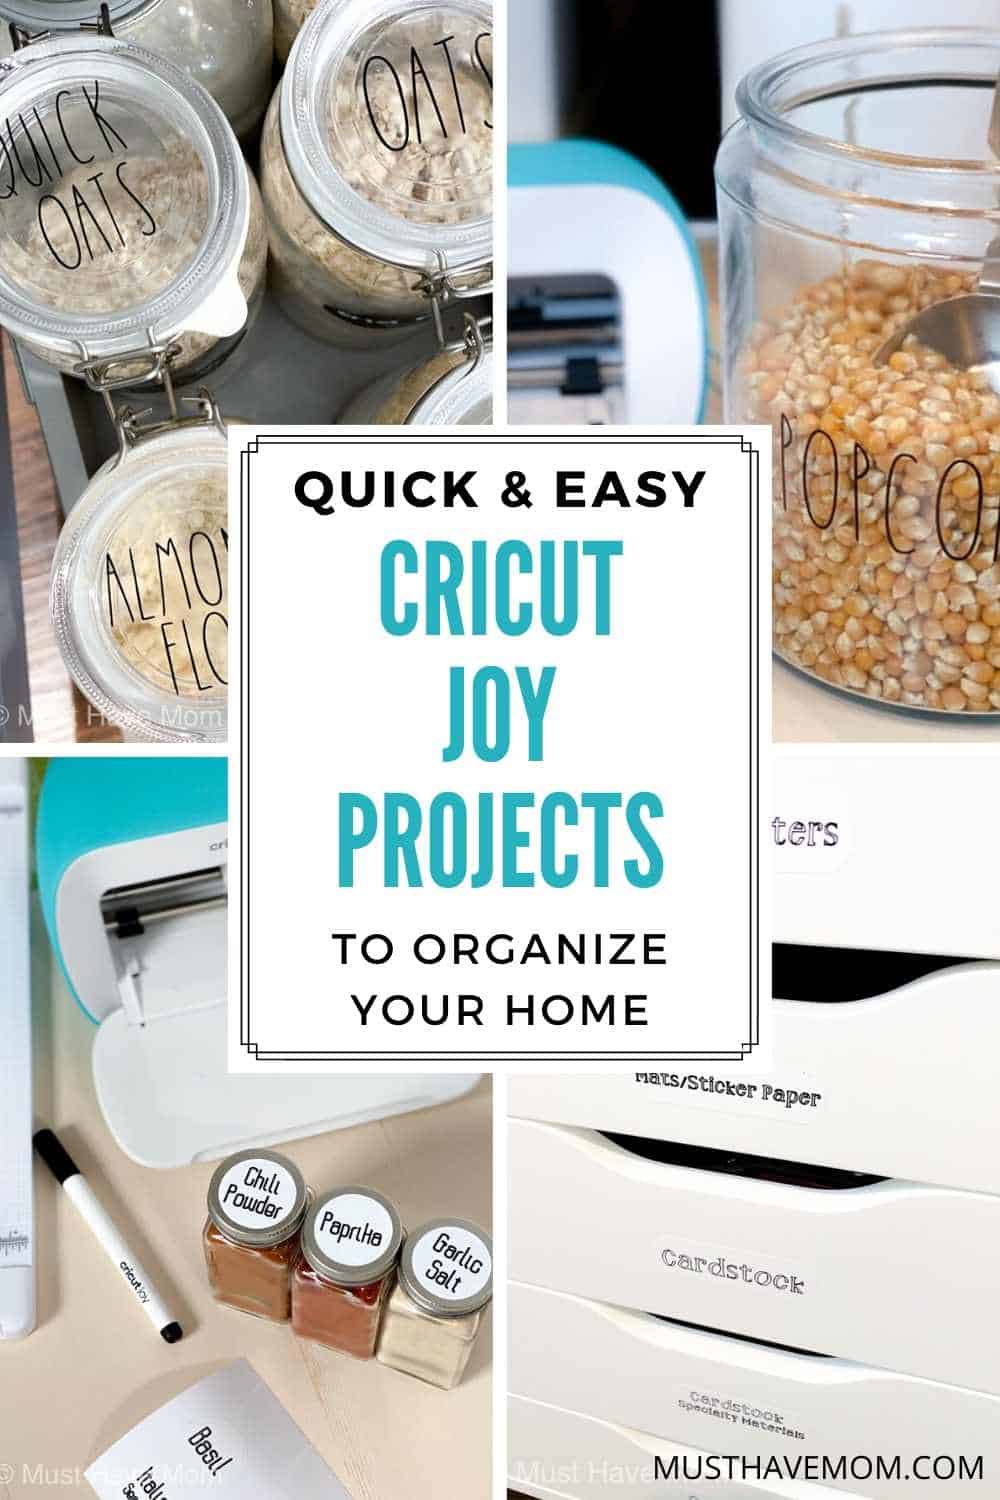 5 Easy Cricut Joy Projects To Organize Your Home - Must Have Mom